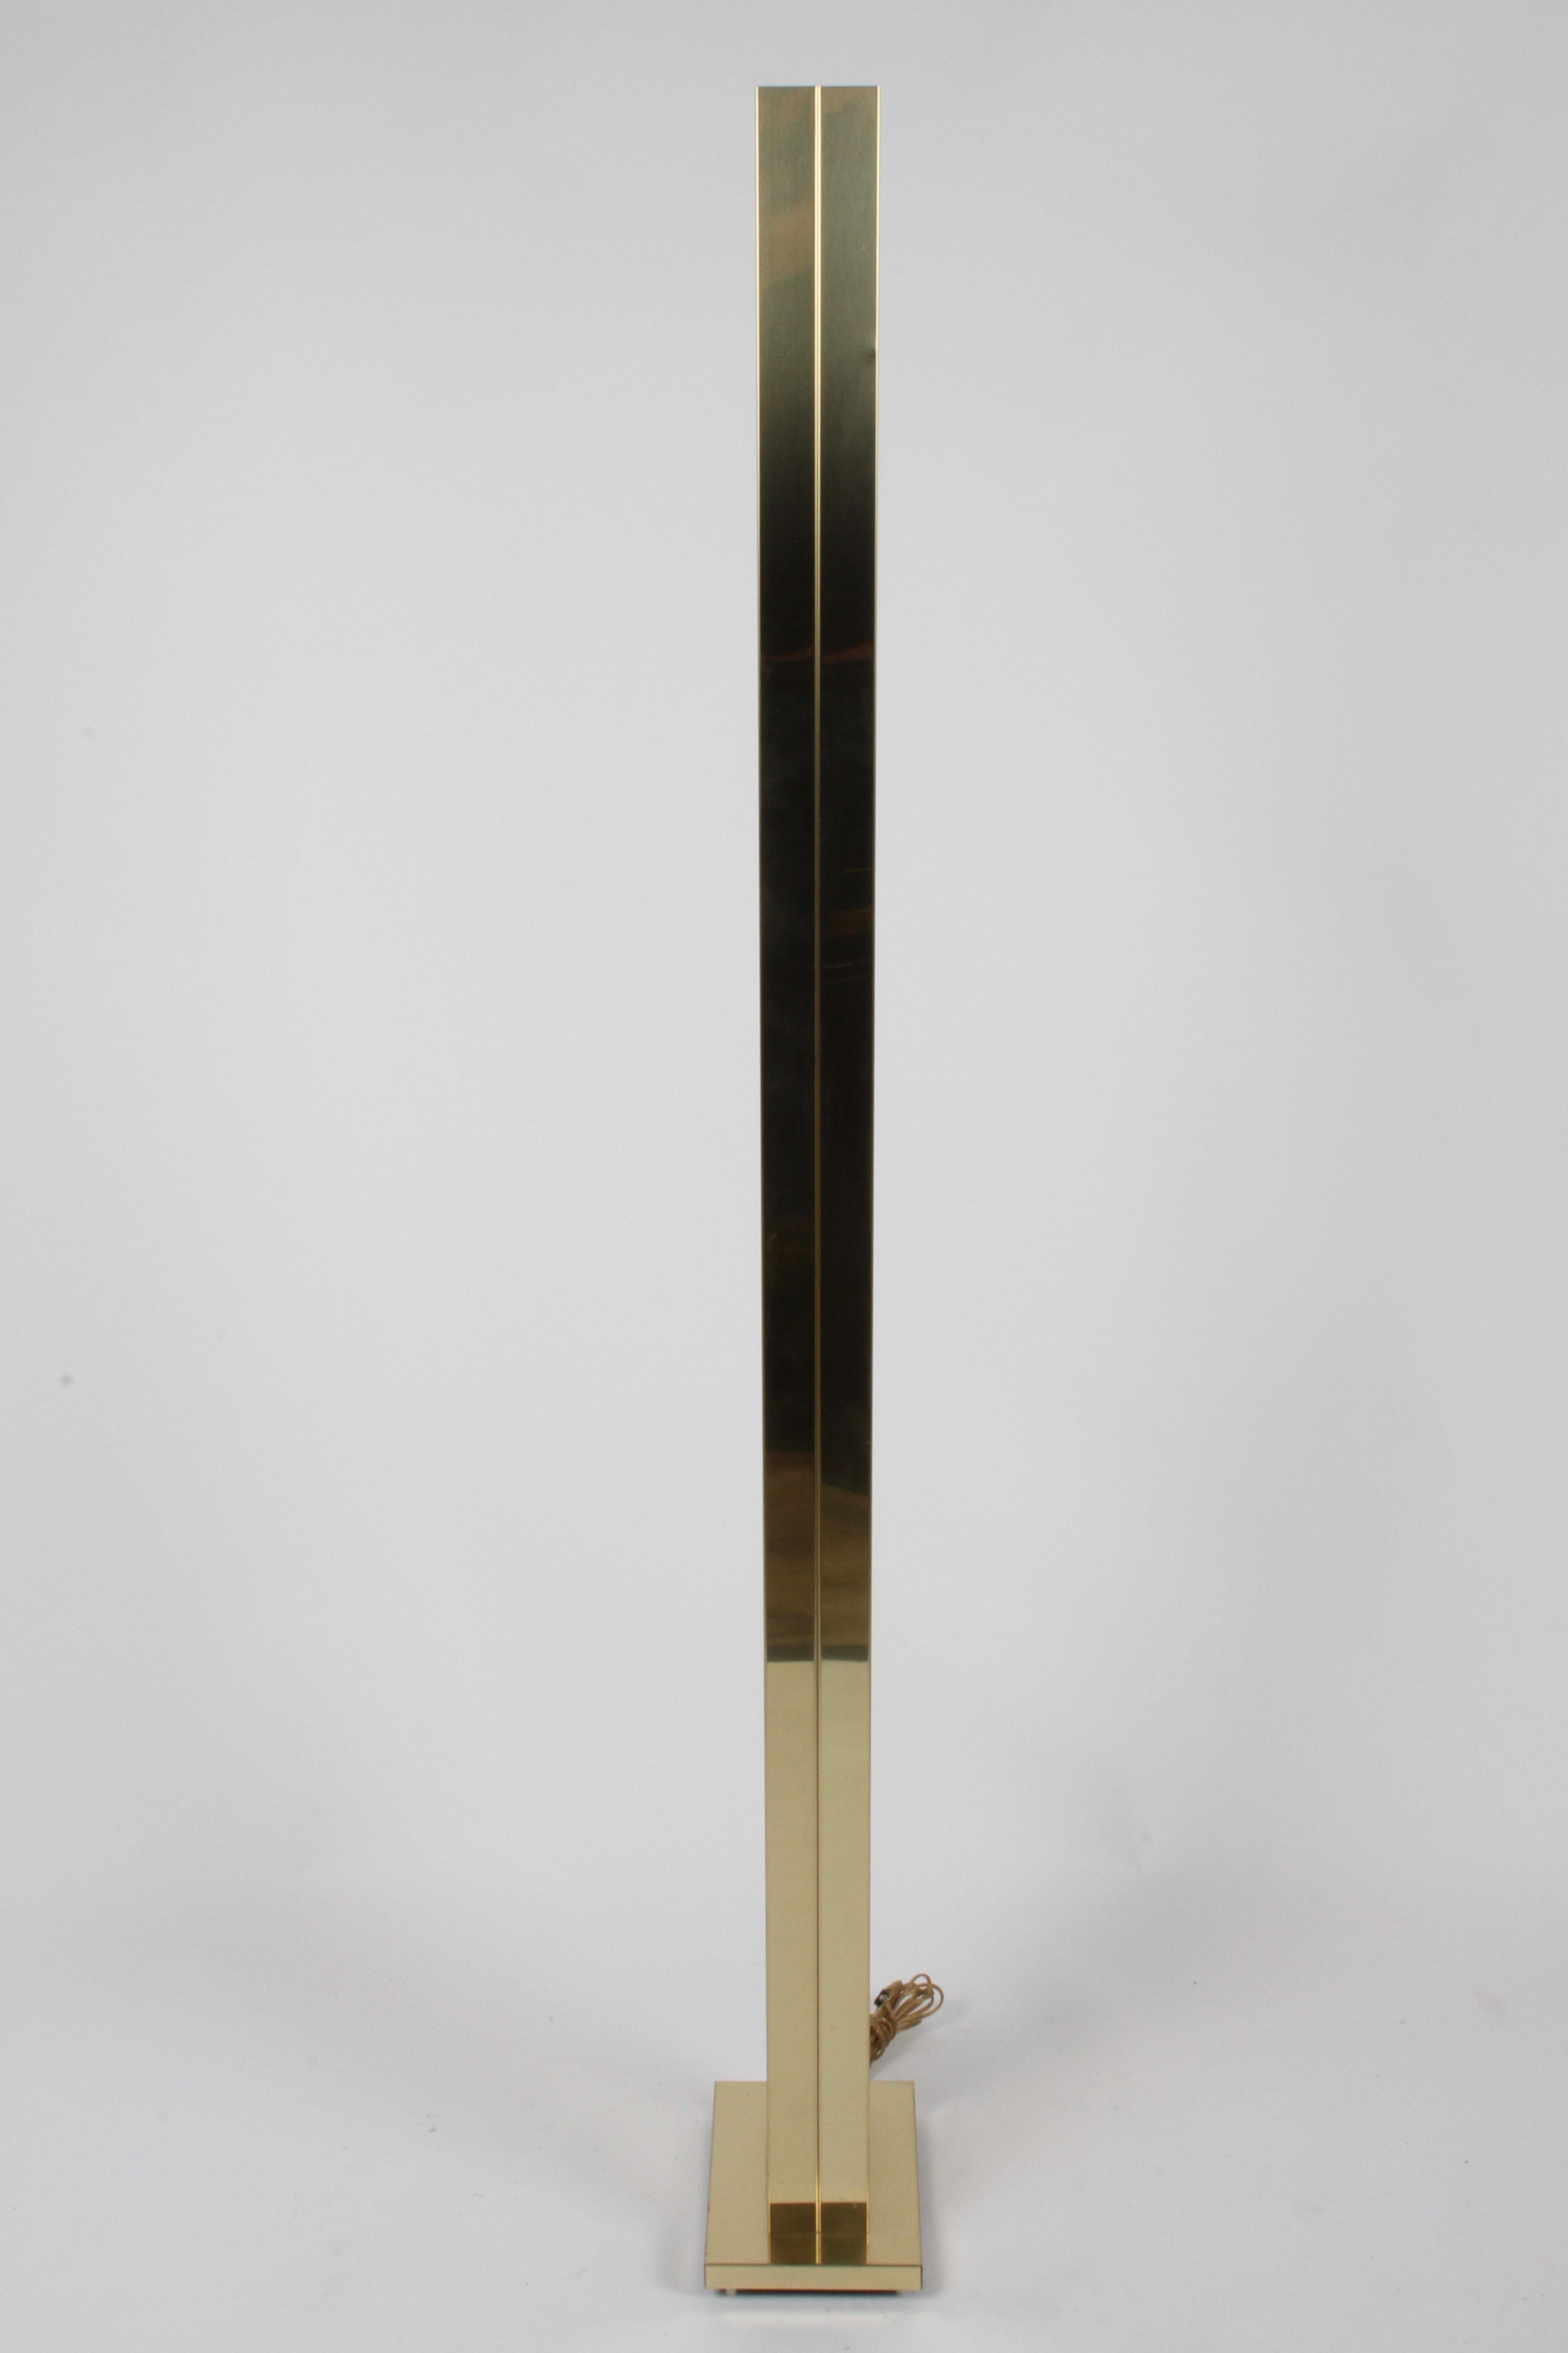 American Pair of 1970s Brass Monolith Skyscraper Torchiere Floor Lamps by Casella